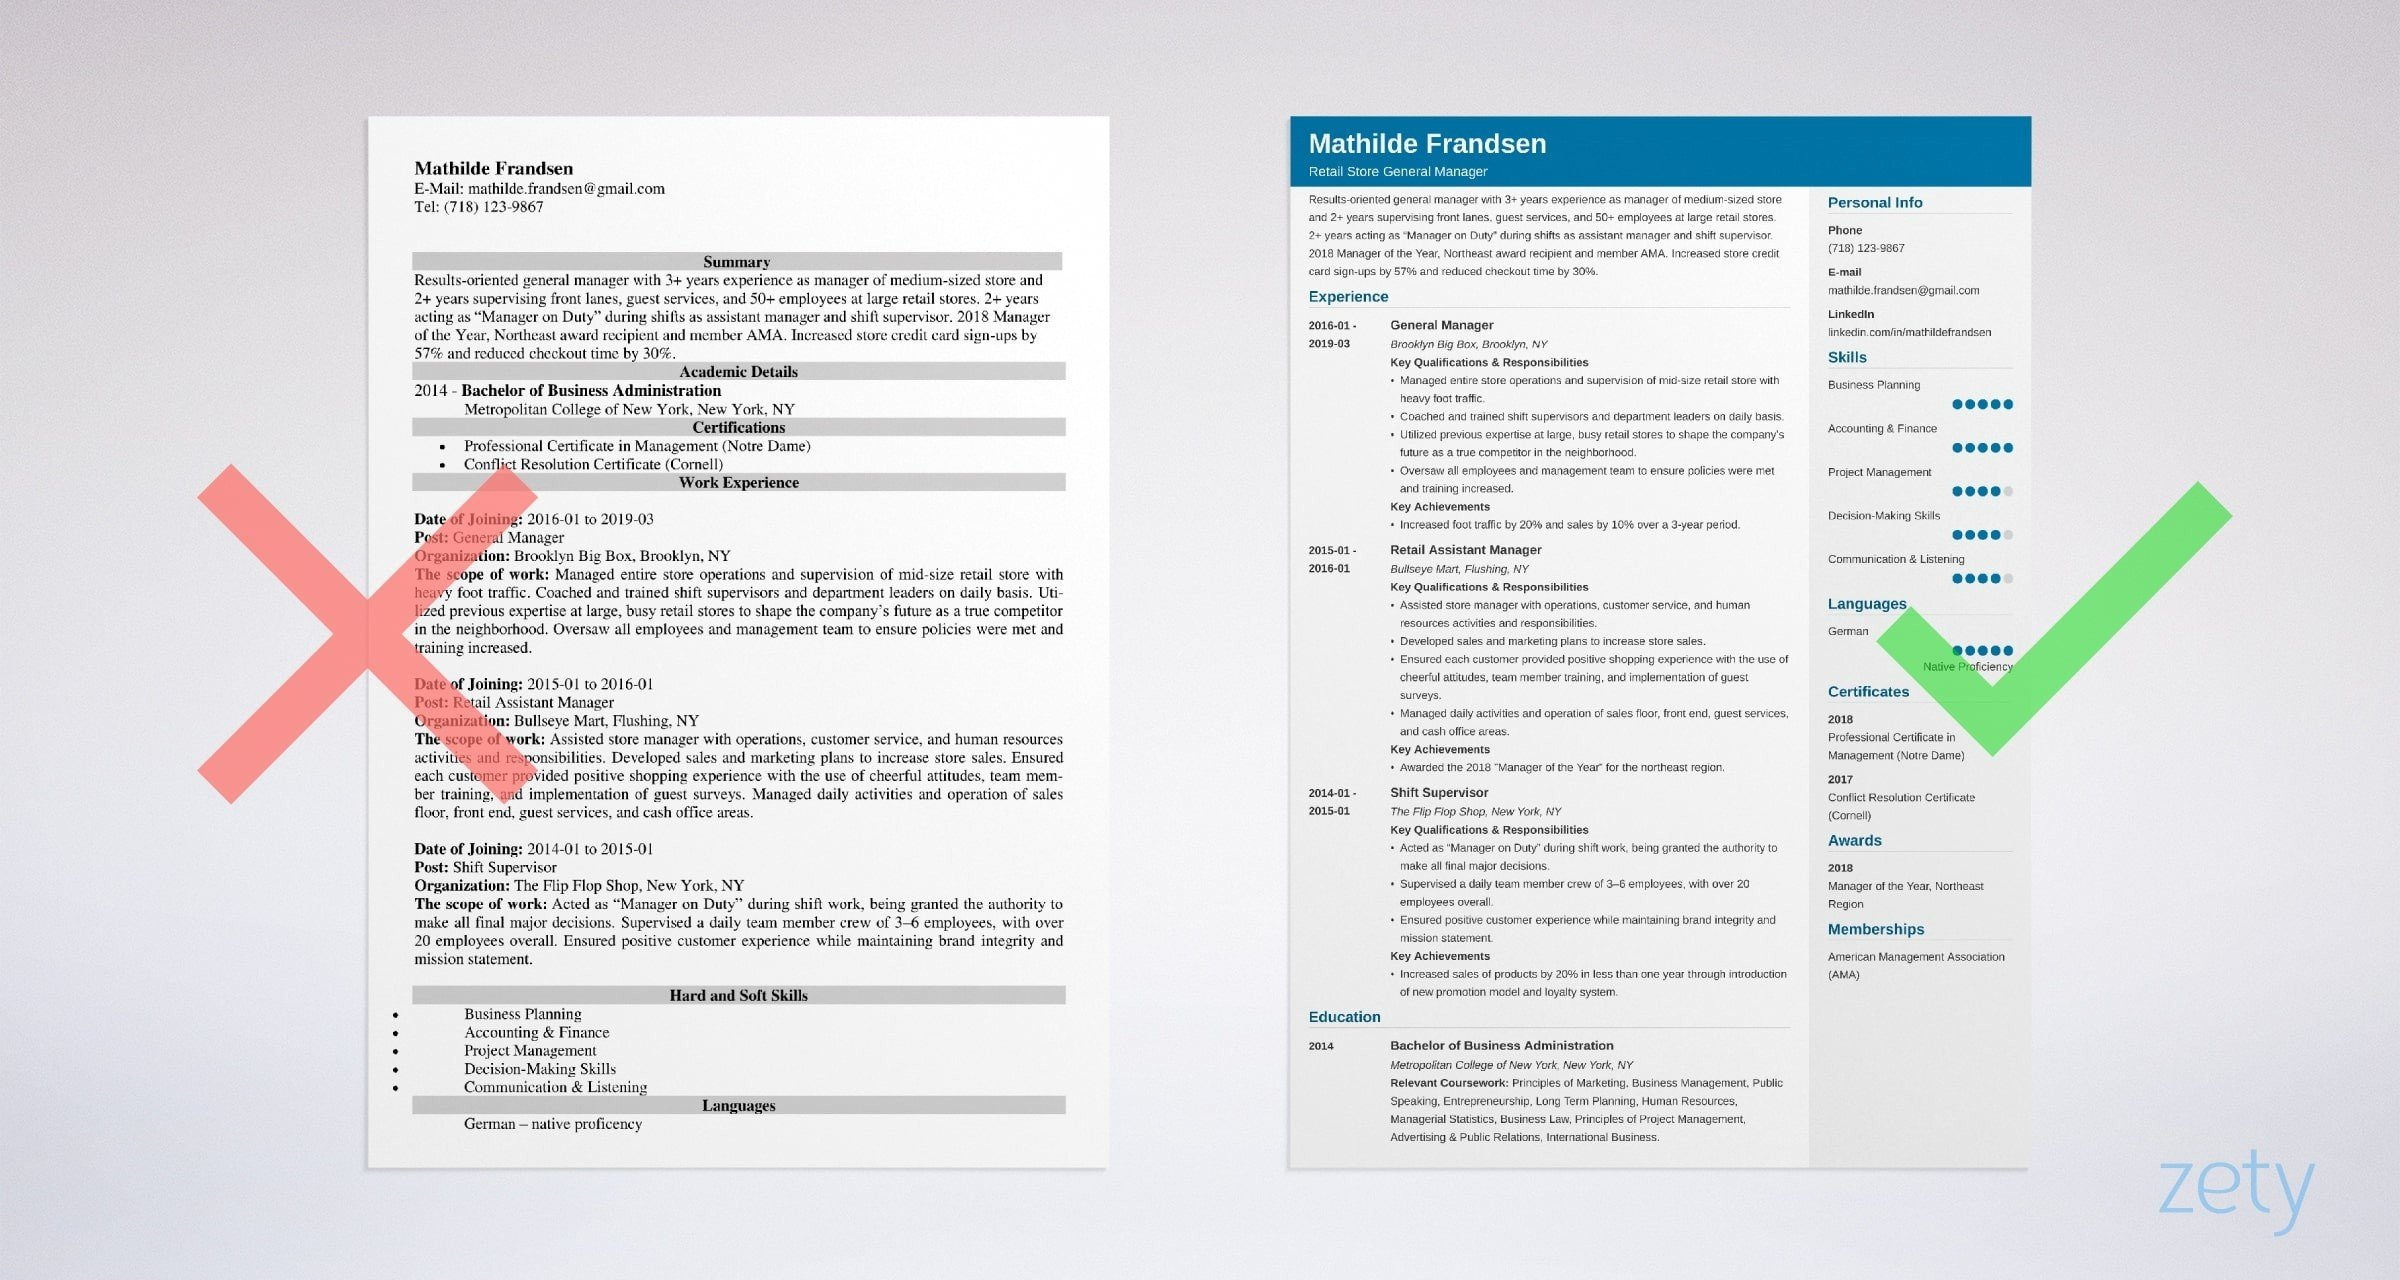 General Manager Resume Template Guide 20 Examples in dimensions 2400 X 1280